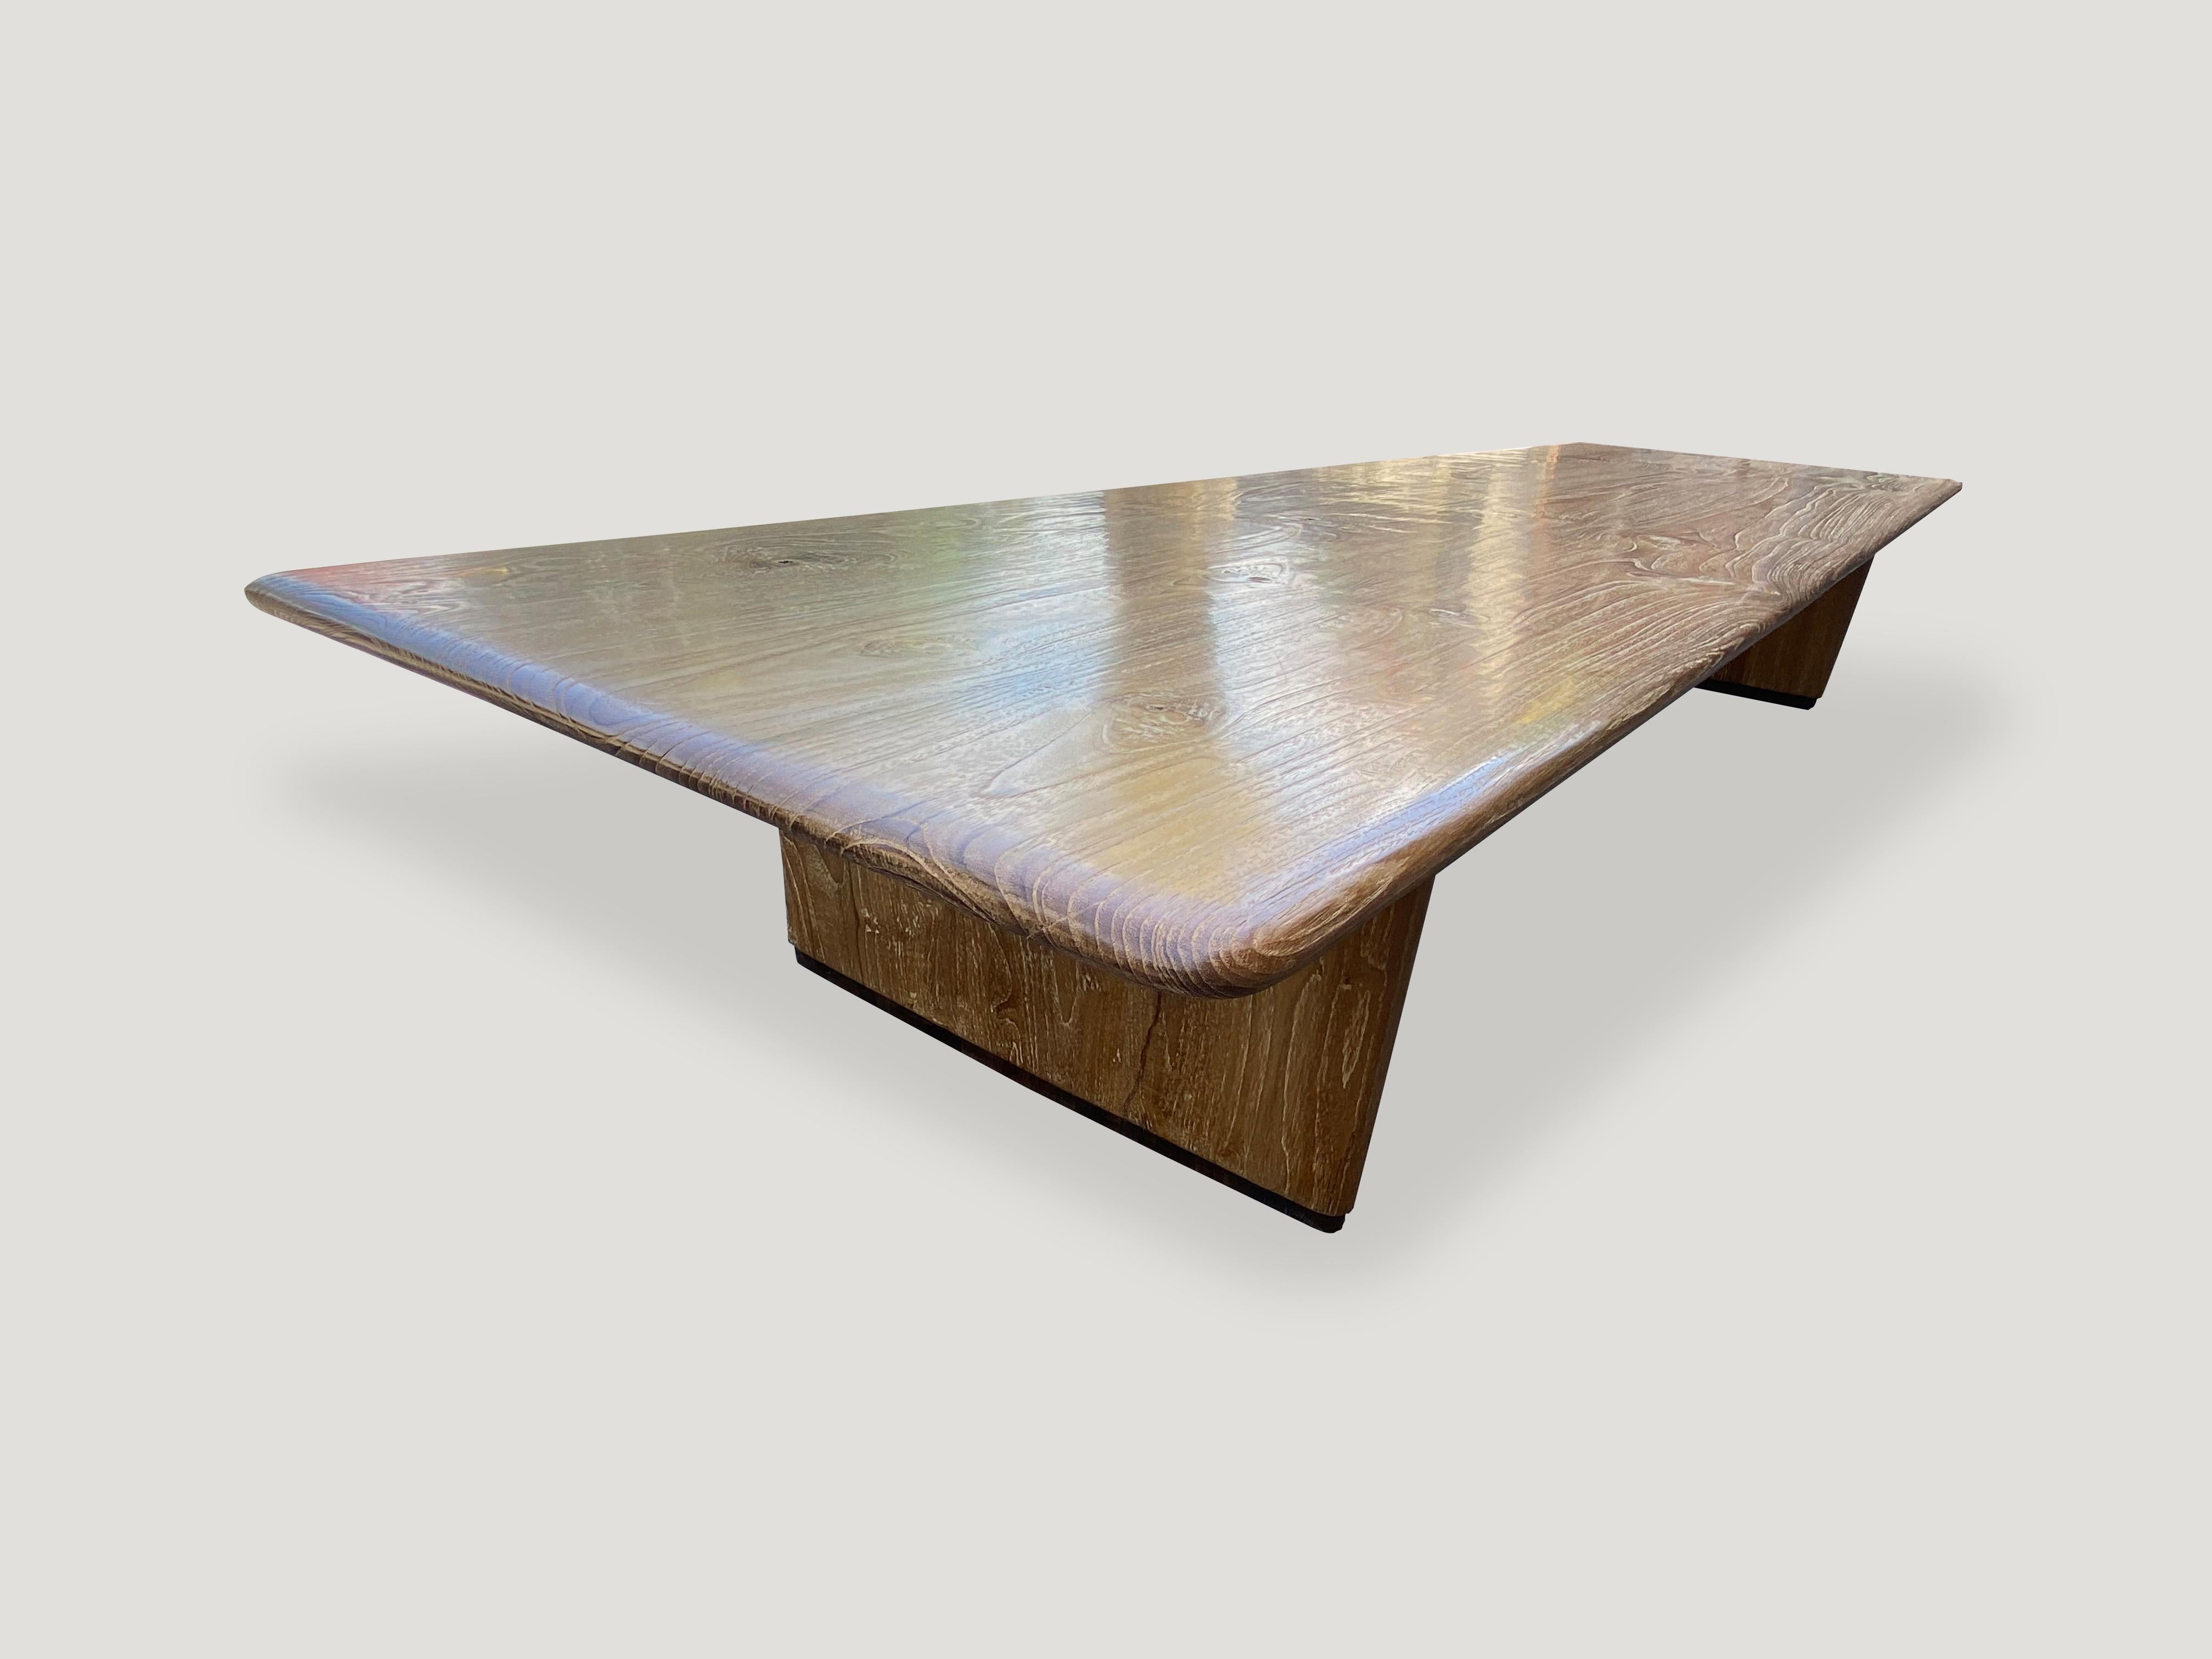 Andrianna Shamaris Midcentury Style Couture Teak Wood Coffee Table In Excellent Condition For Sale In New York, NY